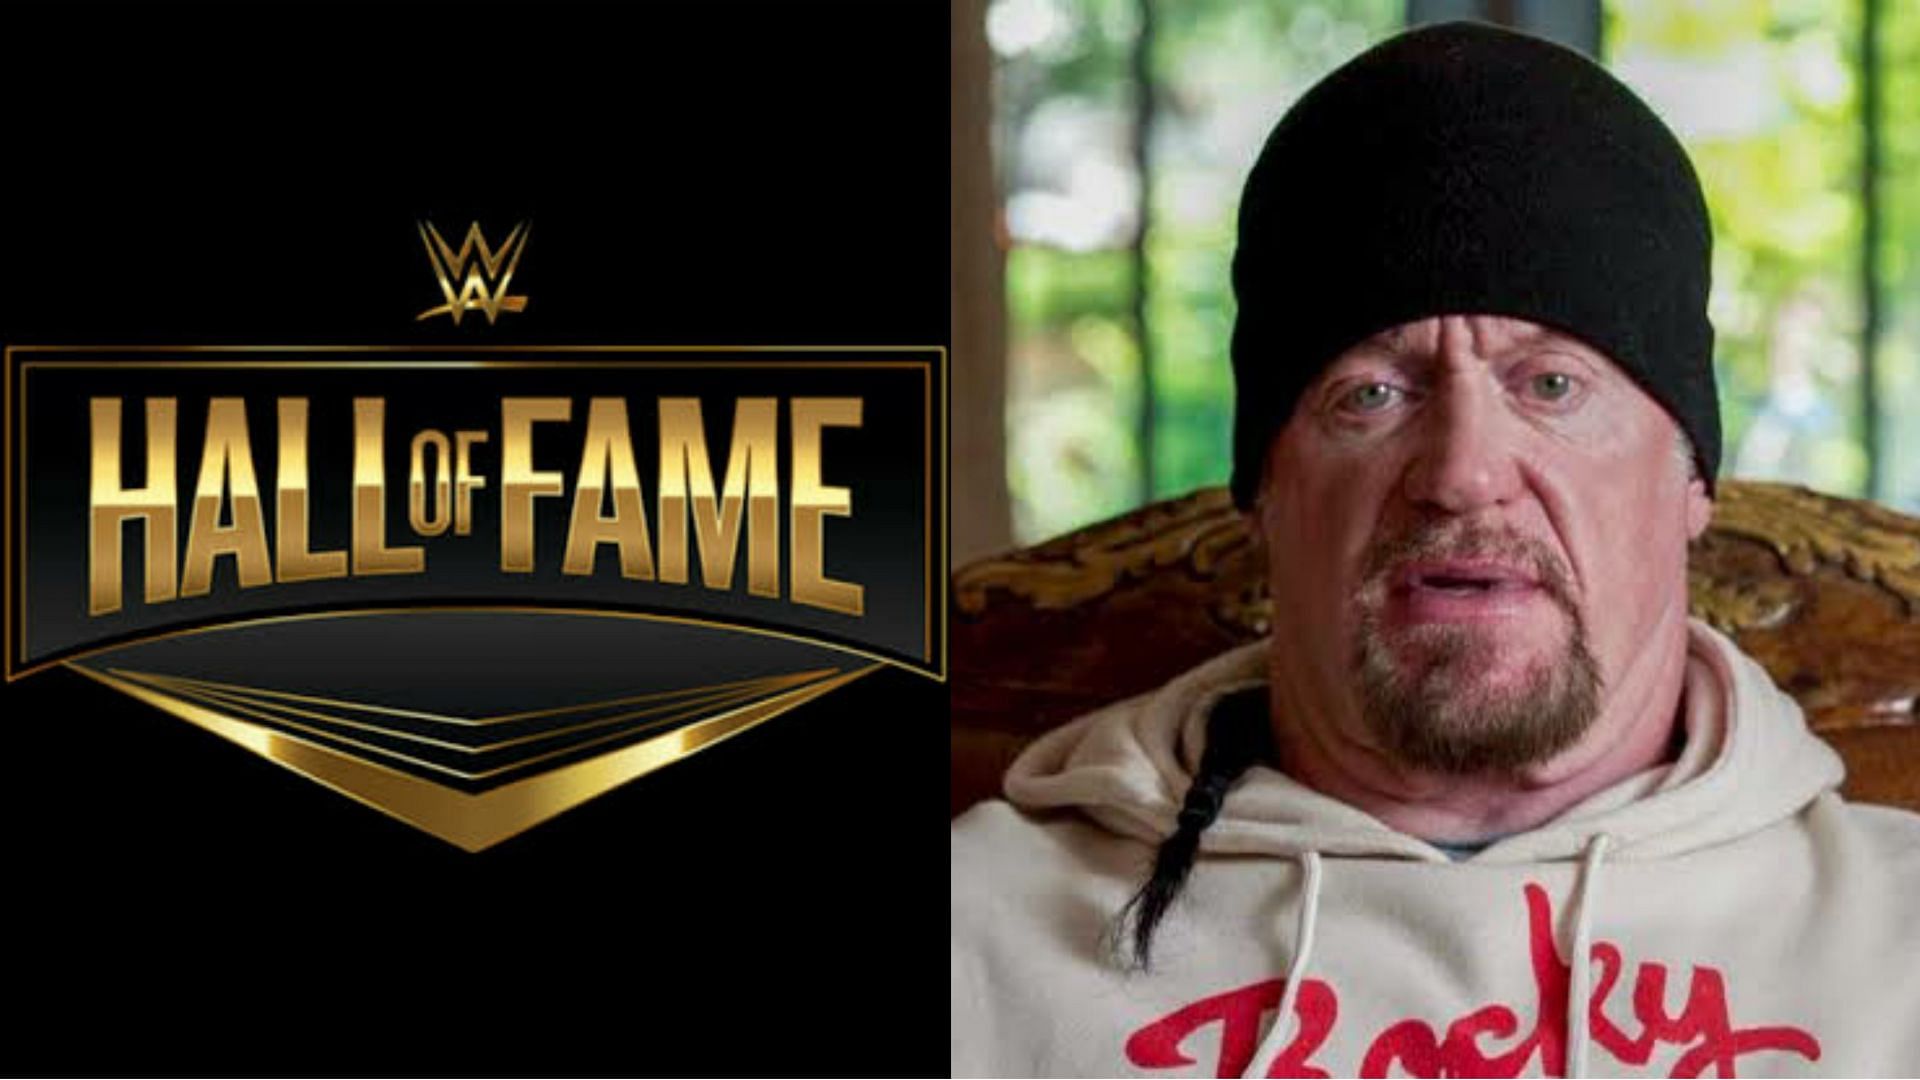 The Undertaker will be immortalized next month.